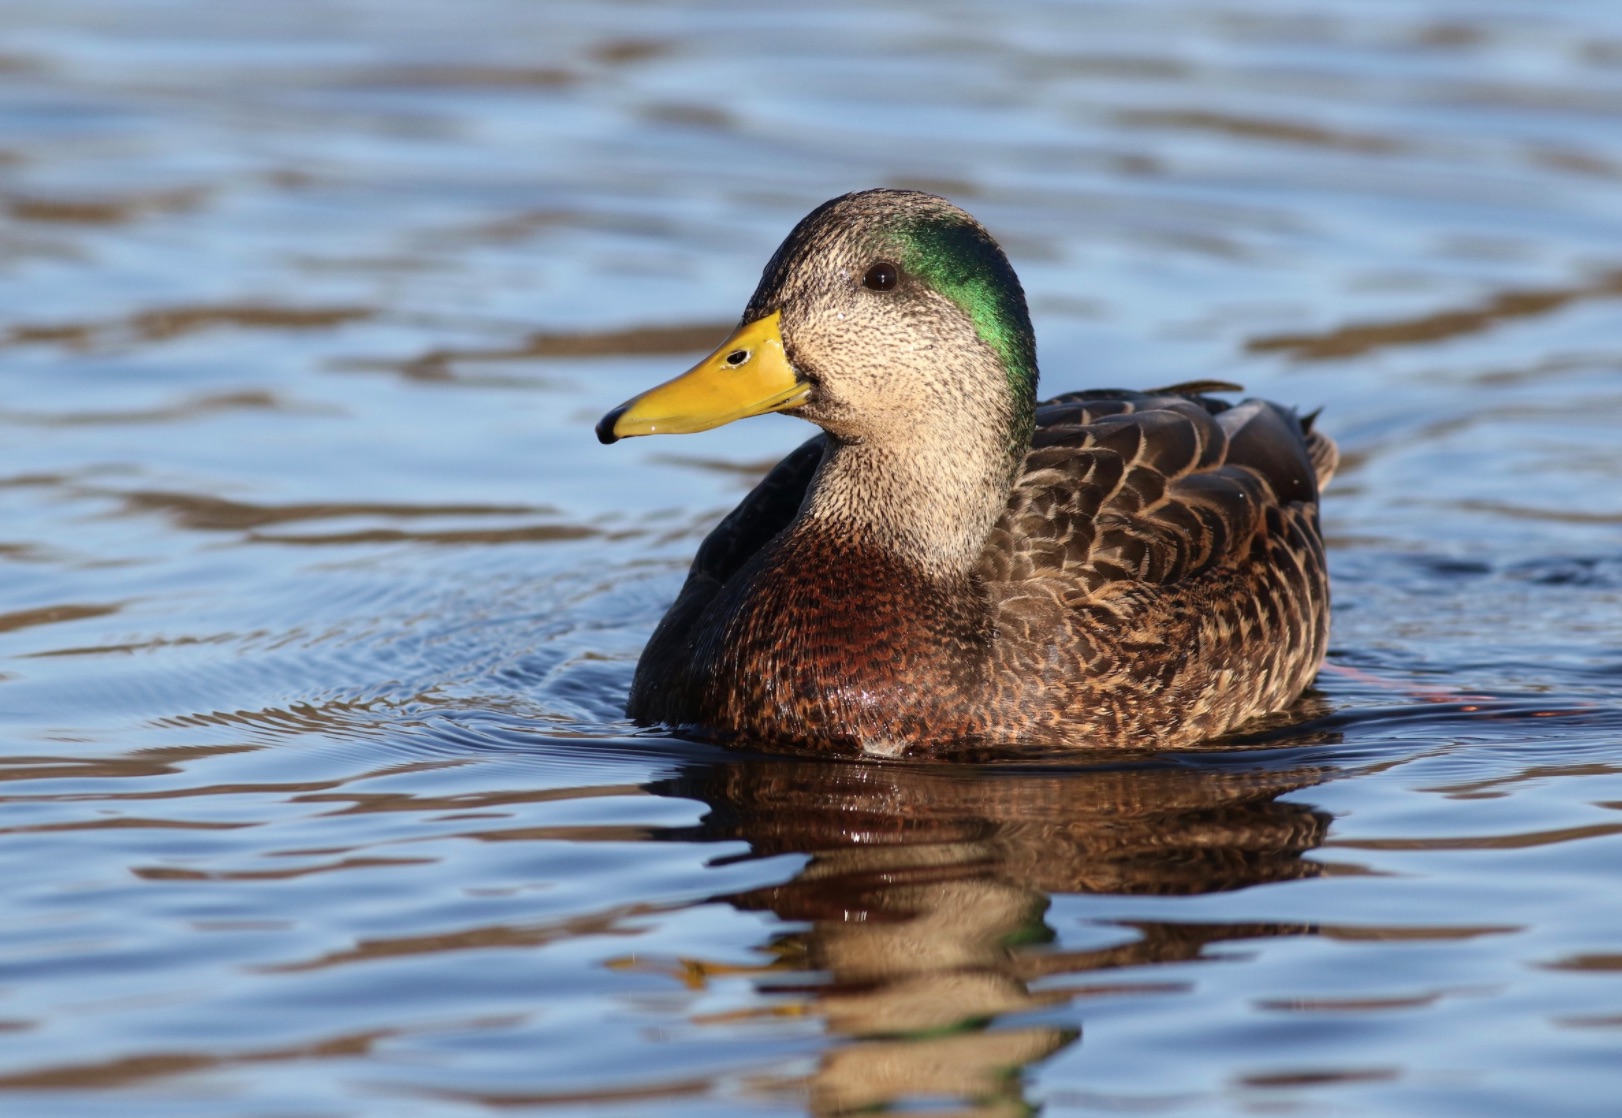 Target the Atlantic Flyway to have your best chance at a mallard/black duck hybrid.